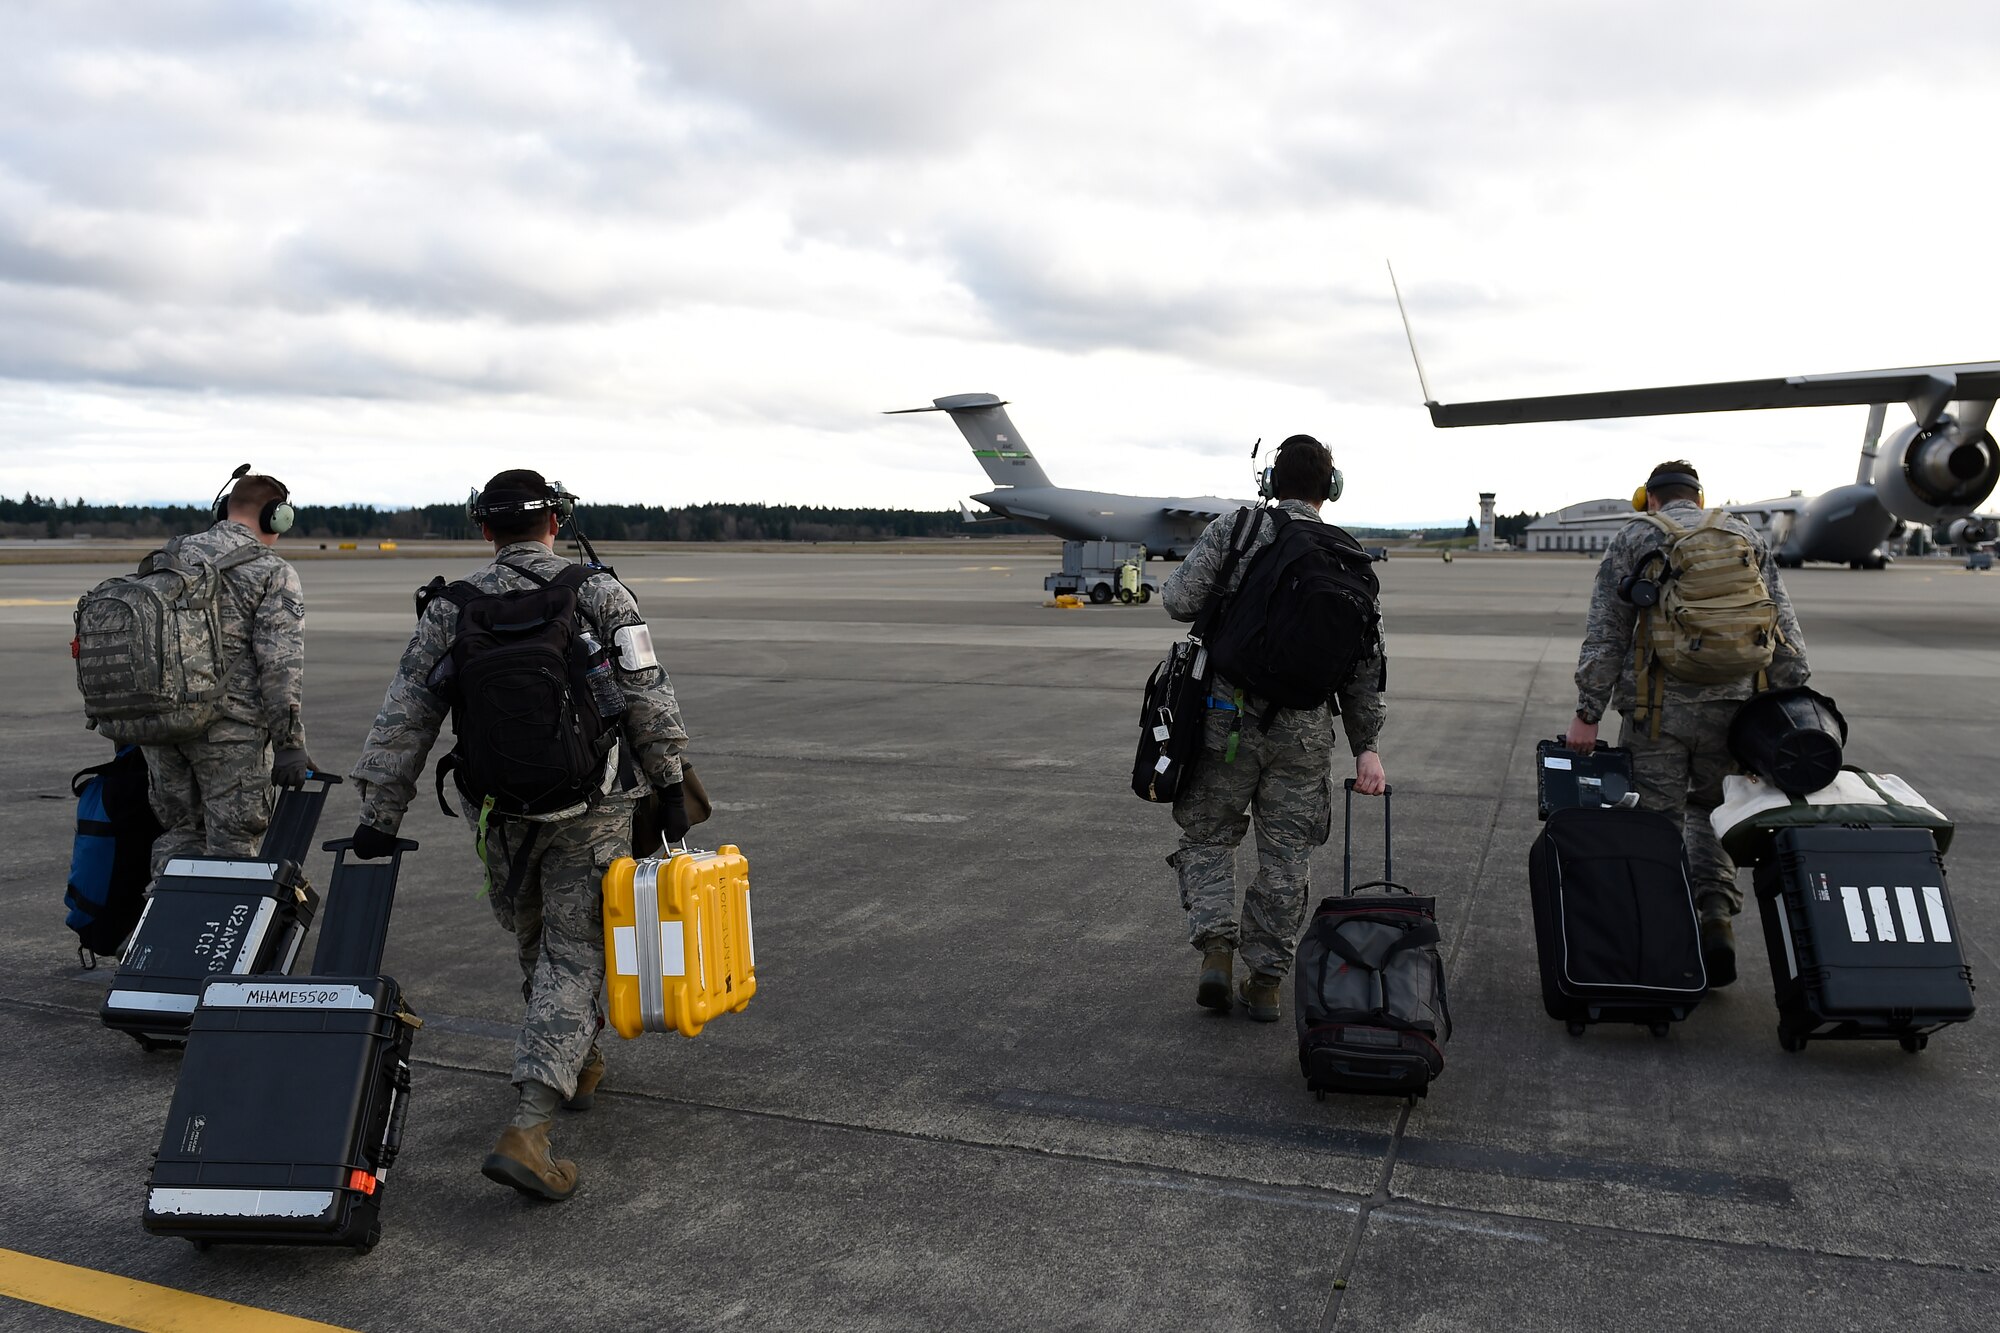 A four person McChord Maintenance Recovery Team walks to a C-17 Globemaster III Feb. 18, 2016 on Joint Base Lewis-McChord, Wash. The team flew to North Island Naval Station, Calif., to repair a C-17 that had maintenance issues there. (U.S. Air Force photo/Tech Sgt. Tim Chacon)